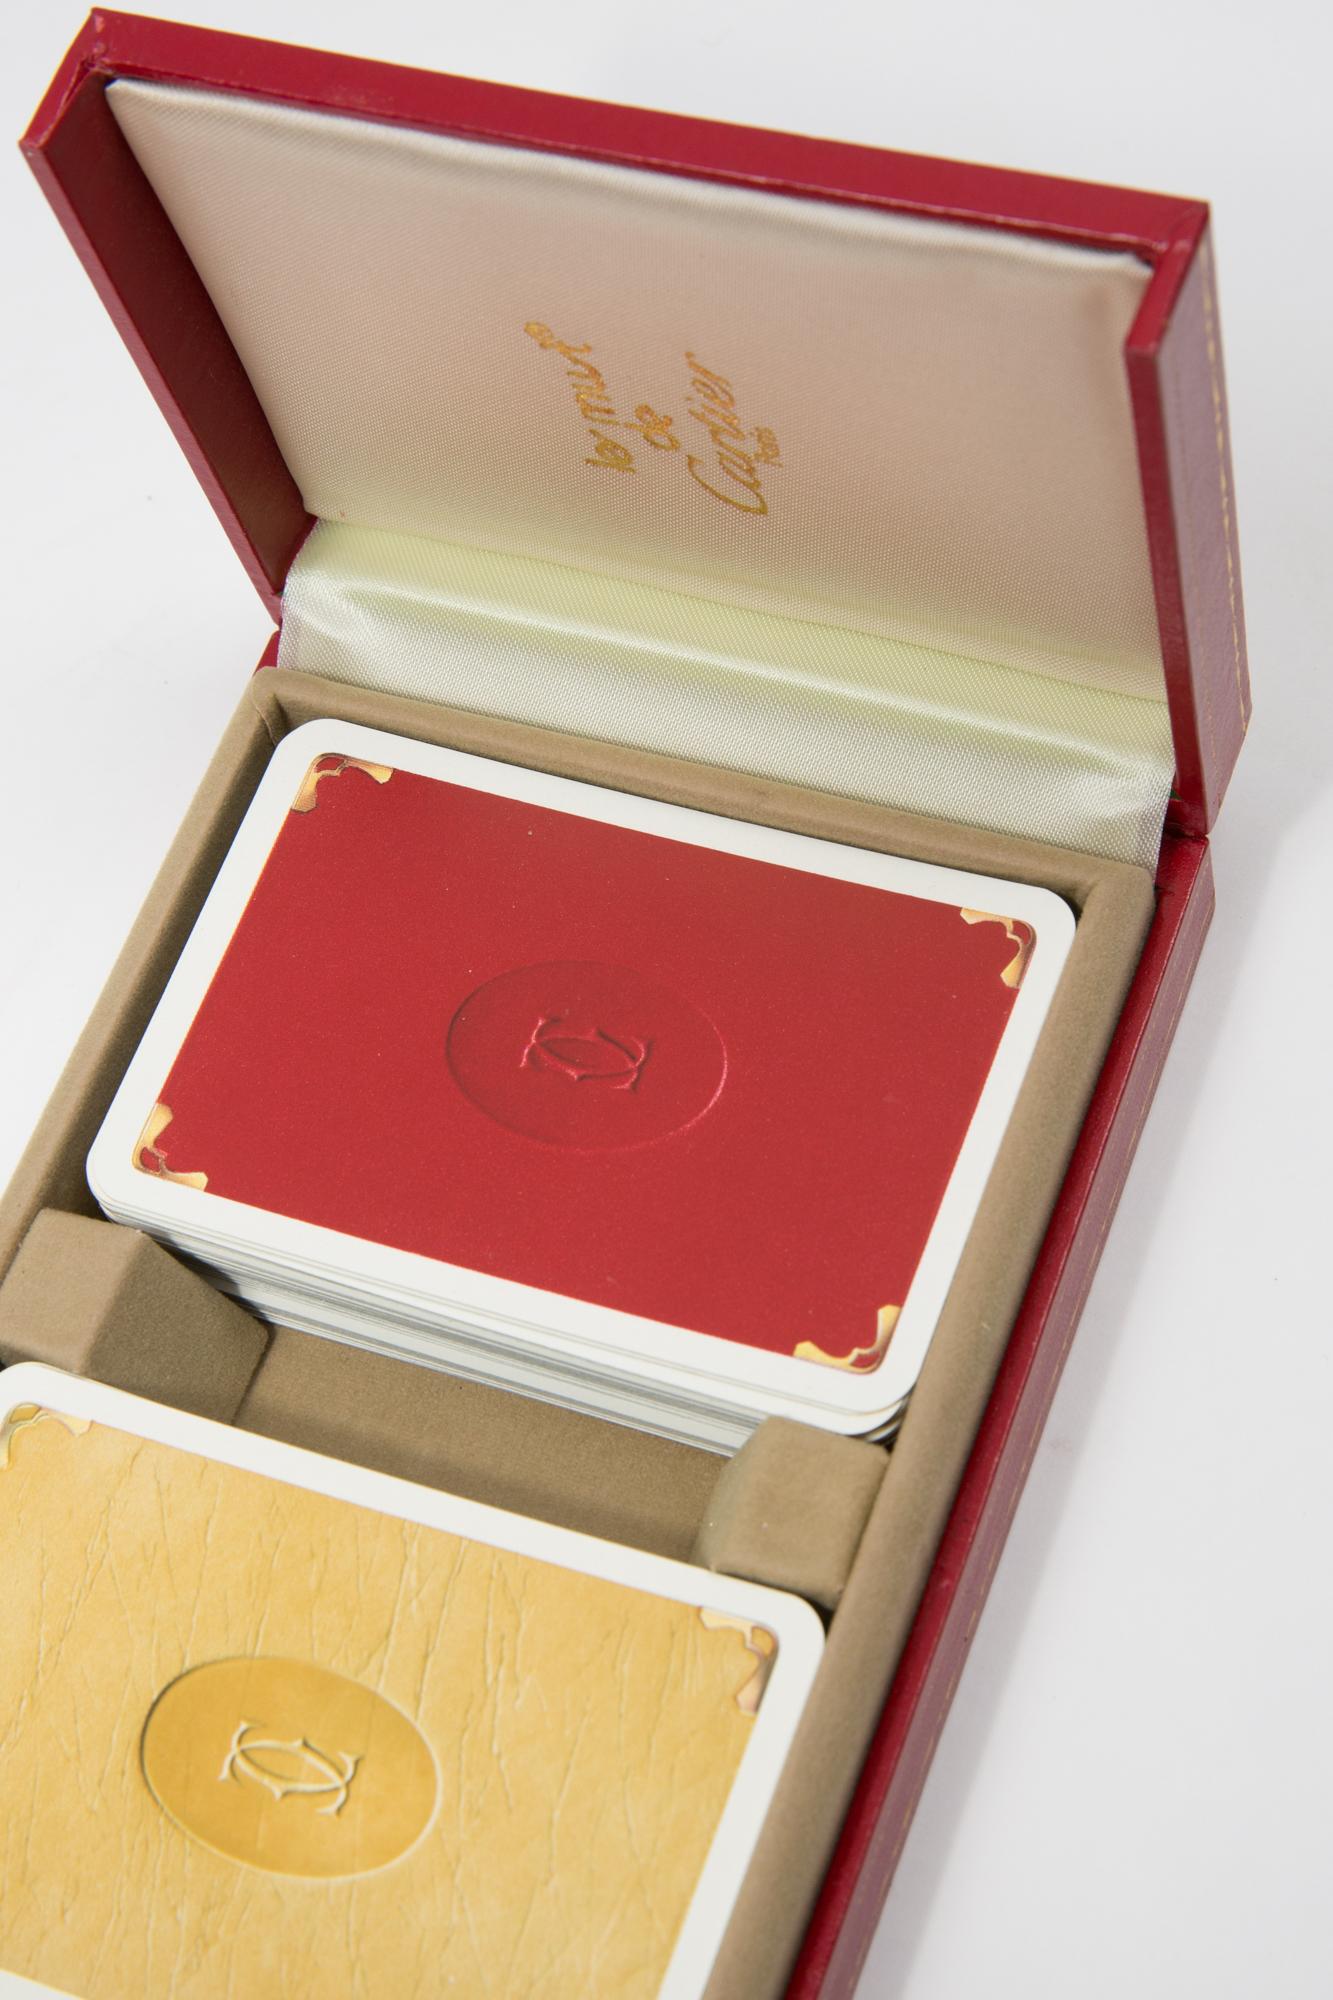 Cartier playing cards box featuring one deck plus joker, poker, bridge playing cards in Cartier red 2-doors case. The silk-lined box of cards with 18-karat gilded corners, printed with the Les Must de Cartier logo, they are not sealed. 
Circa 1970s